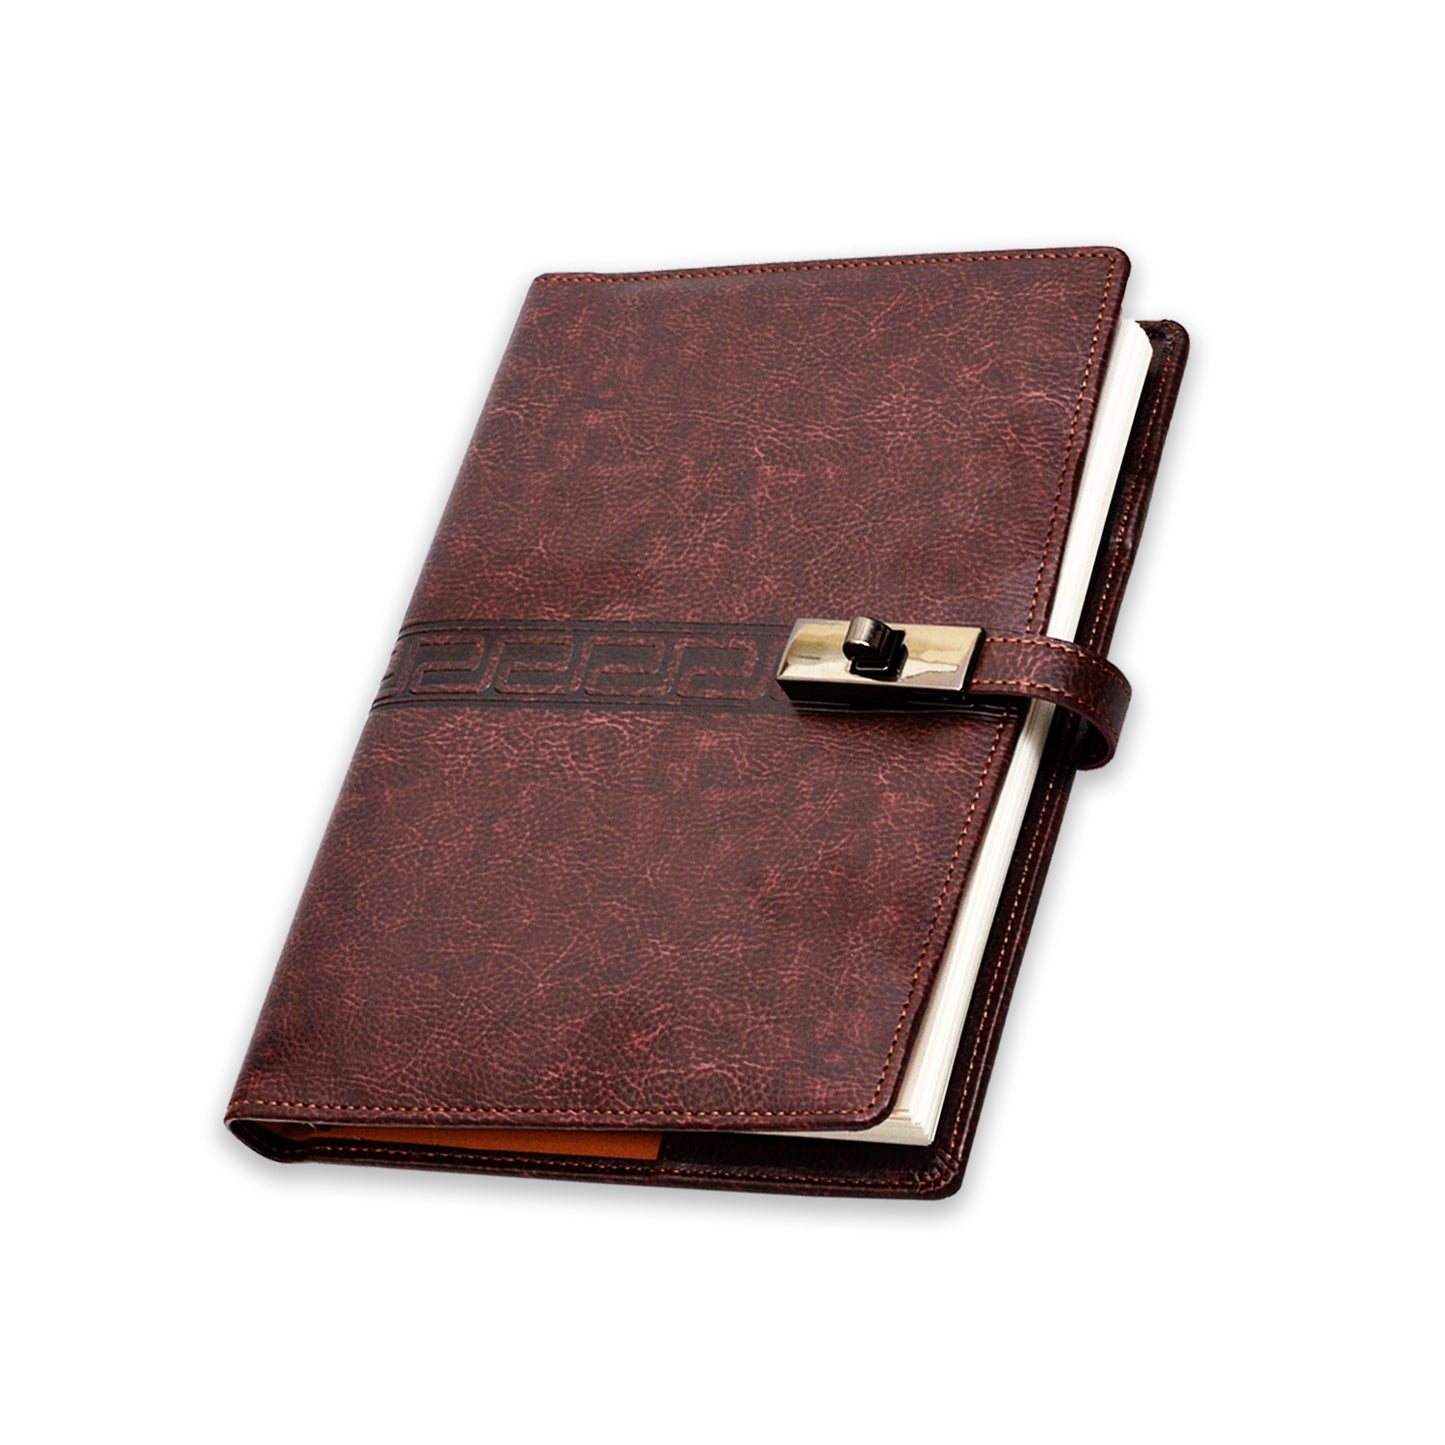 New Year Faux Leather Diary Stylish and Conference Everything Planner and Organiser Office Diary Pen